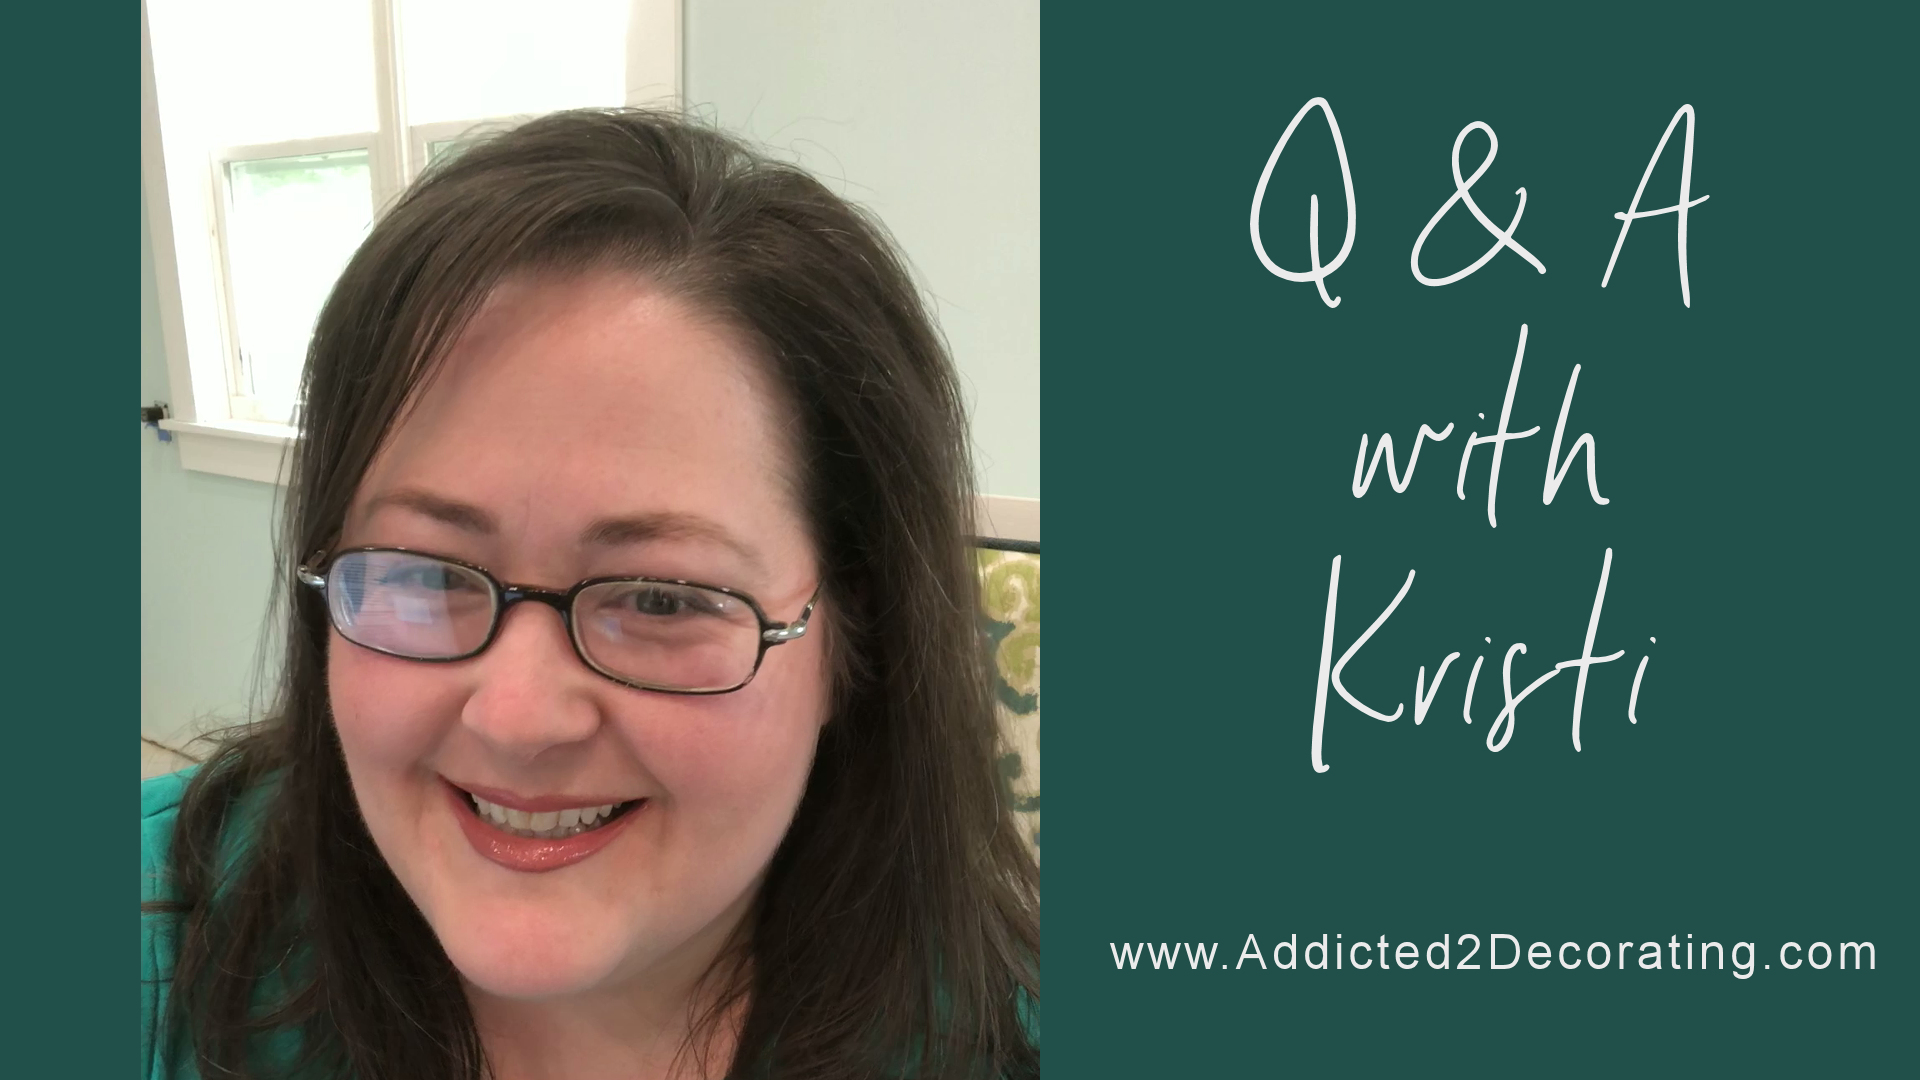 Q & A With Kristi [VIDEO]